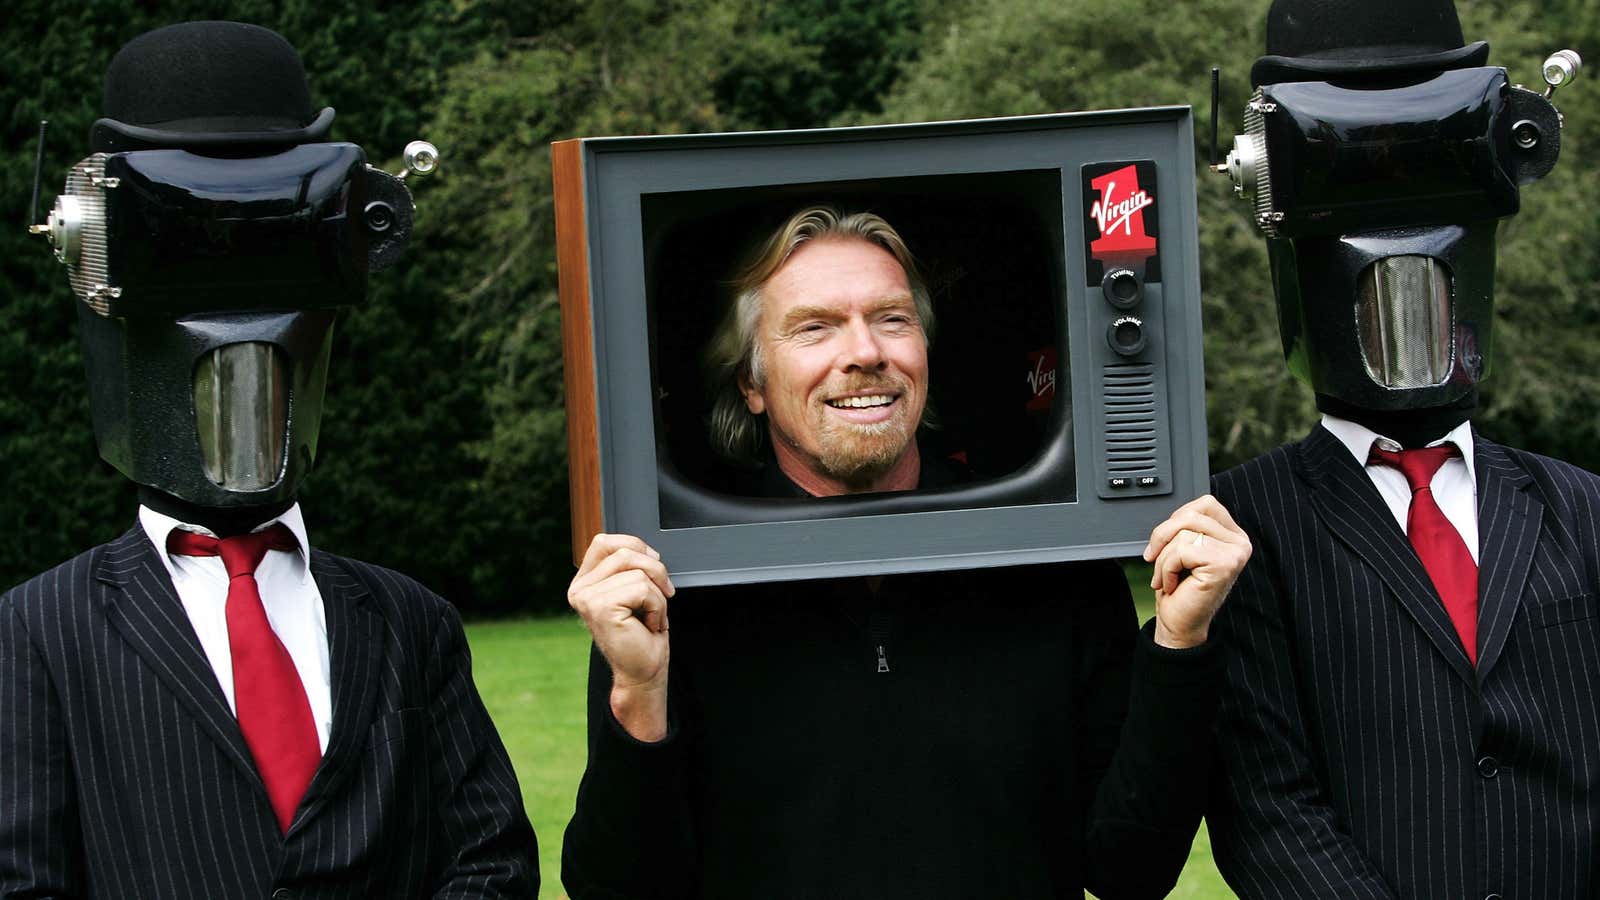 Richard Branson finds himself in the middle of a rivalry.